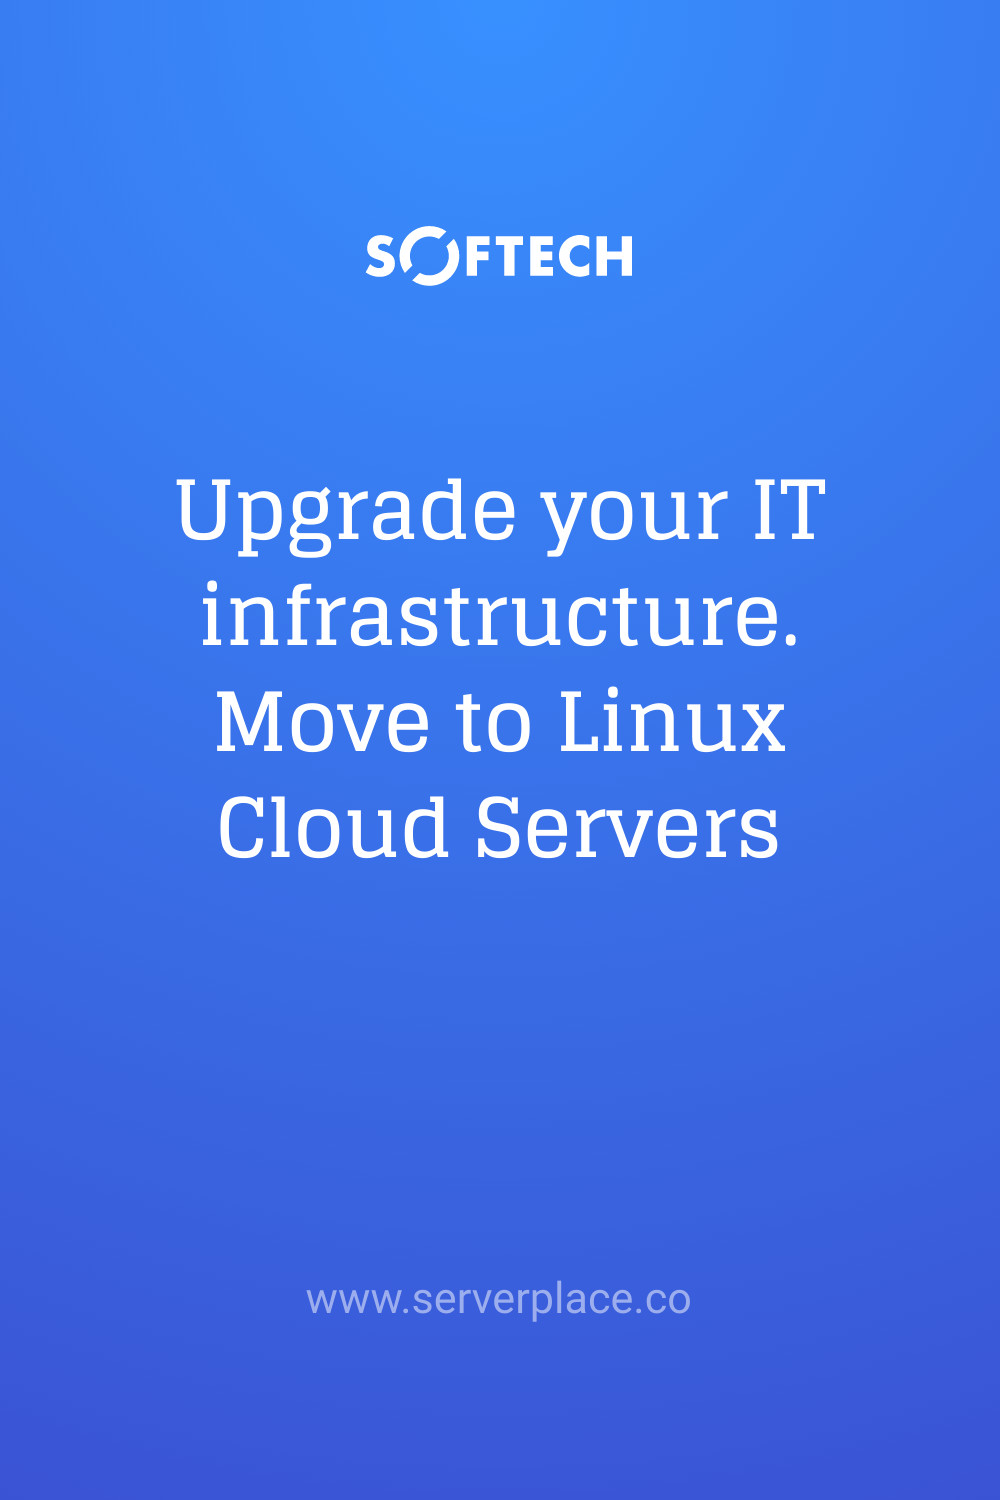 Move to Linux Cloud Servers Inline Rectangle 300x250